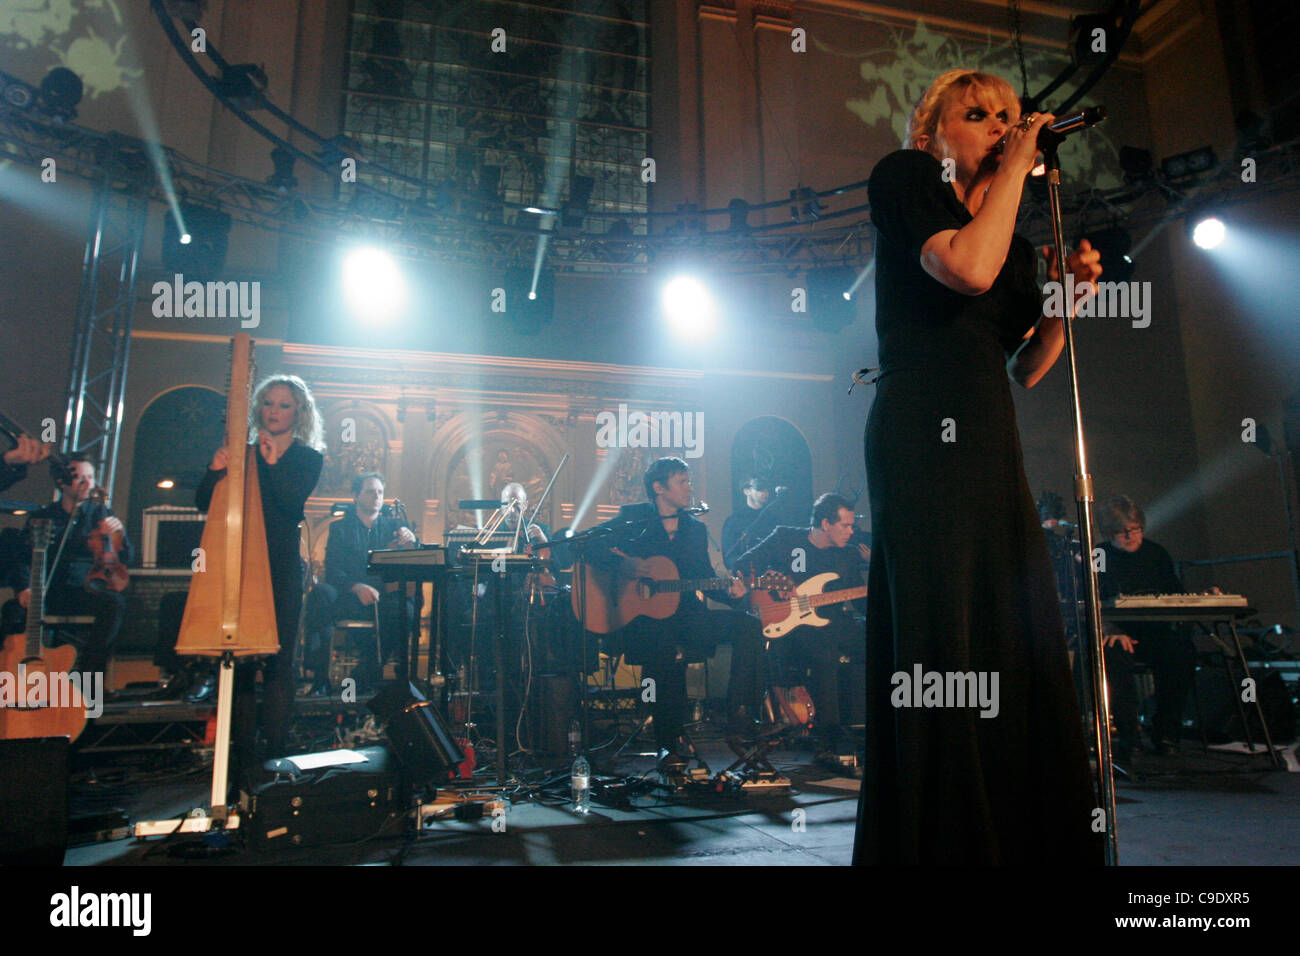 LONDON, UK, 25/11/2011. Goldfrapp play live at Mencap’s Little Noise Sessions in the church of St John-at-Hackney, London. The event is the fourth of six consecutive concerts by various artists in aid of Mencap, a charity working with people with learning disability, their families and carers. Stock Photo